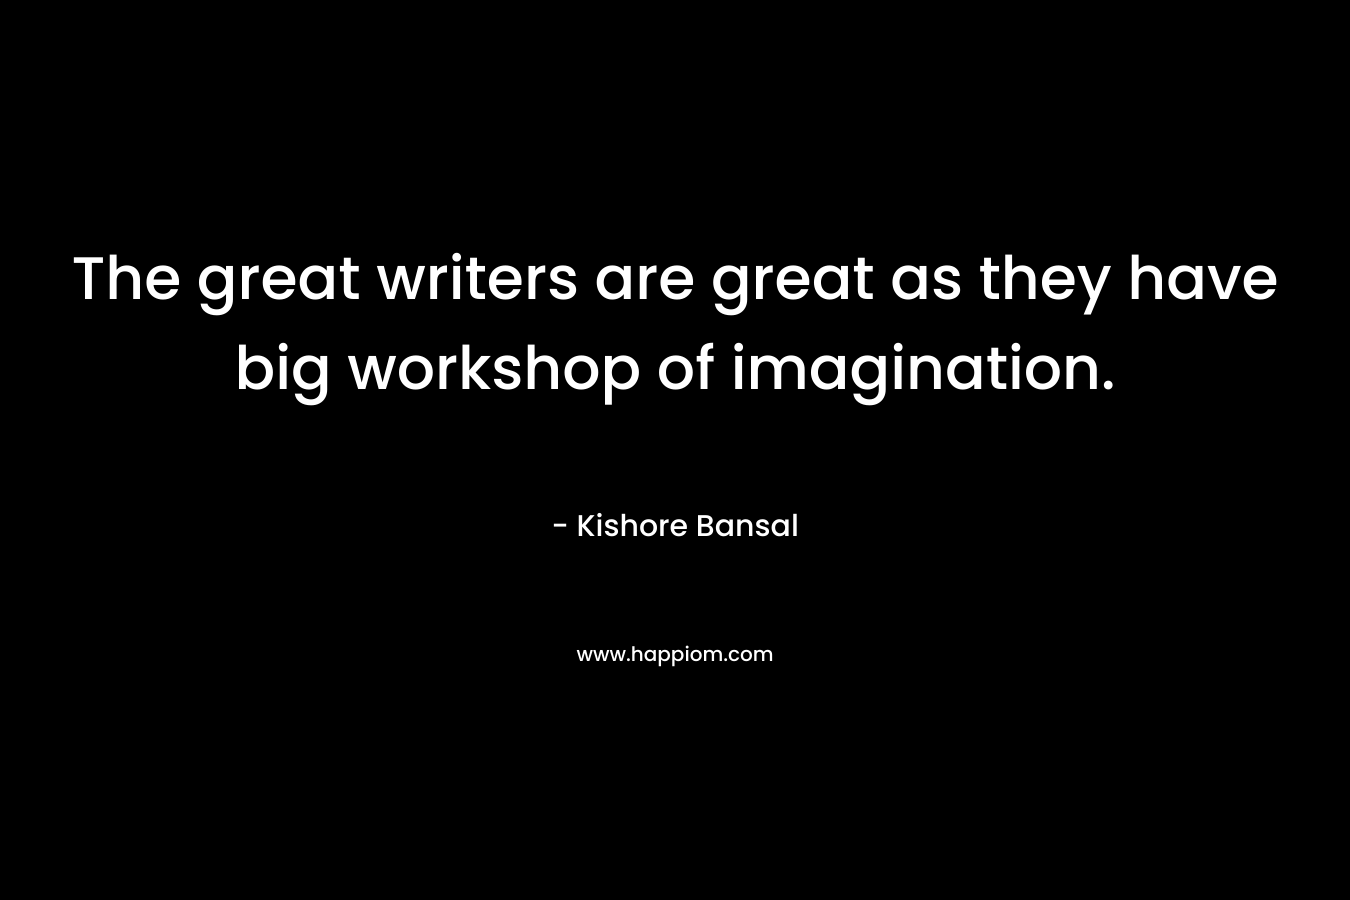 The great writers are great as they have big workshop of imagination. – Kishore Bansal